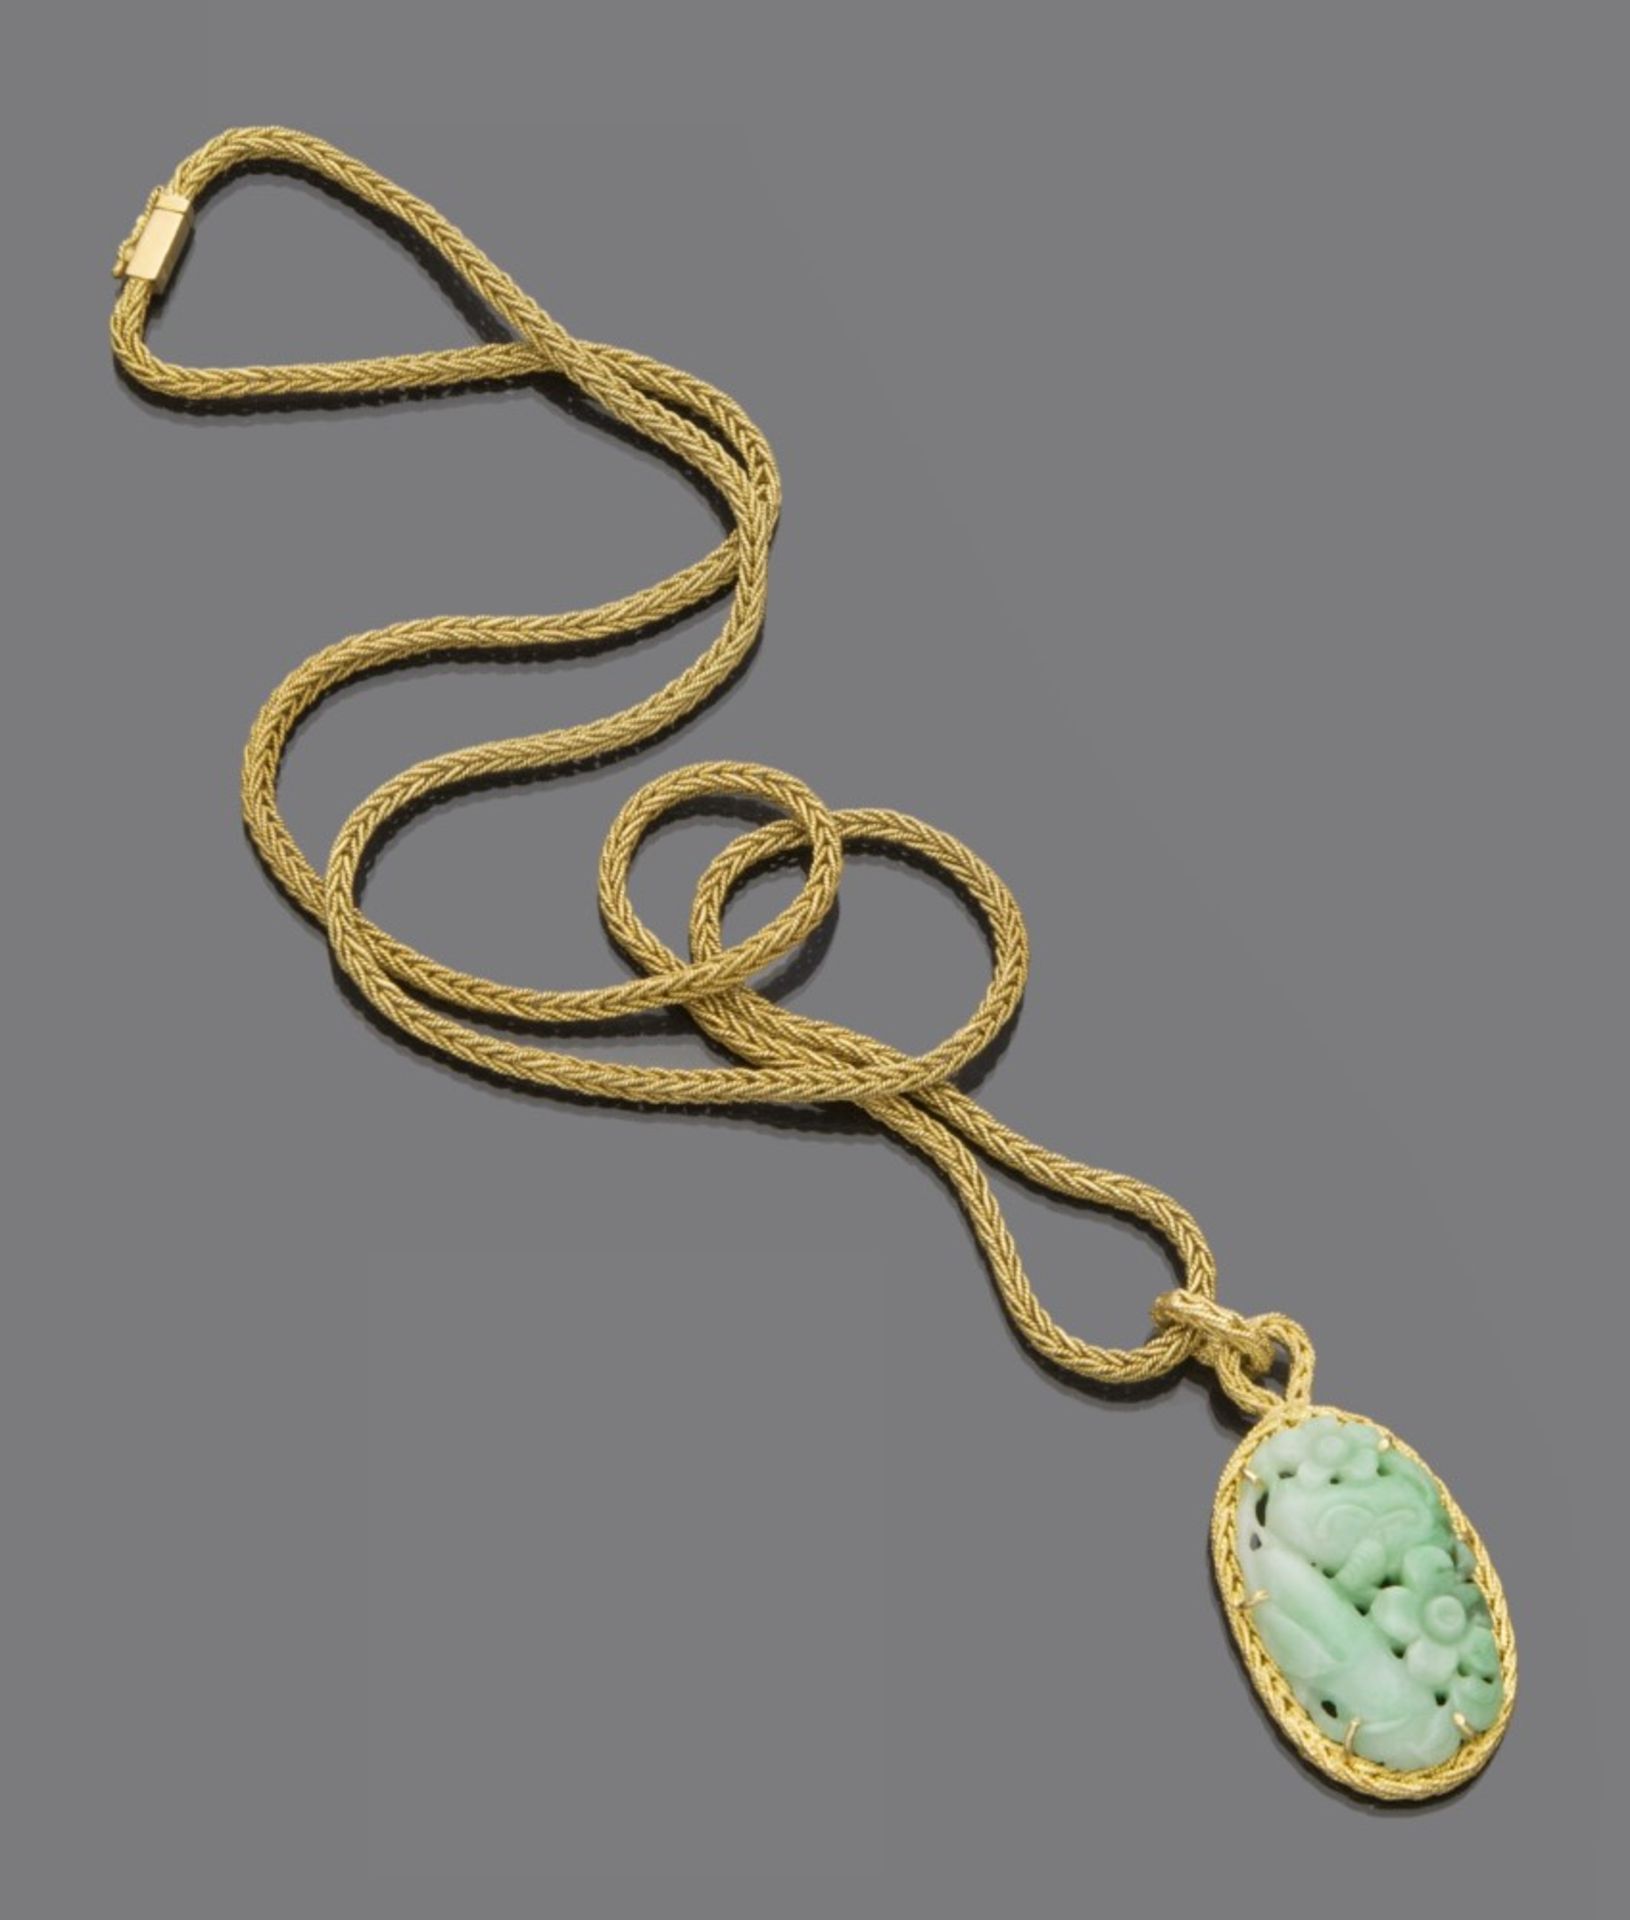 BEAUTIFUL NECKLACE in 18 kt yellow gold. with monkfish motif, with oval shaped jade pendant carved